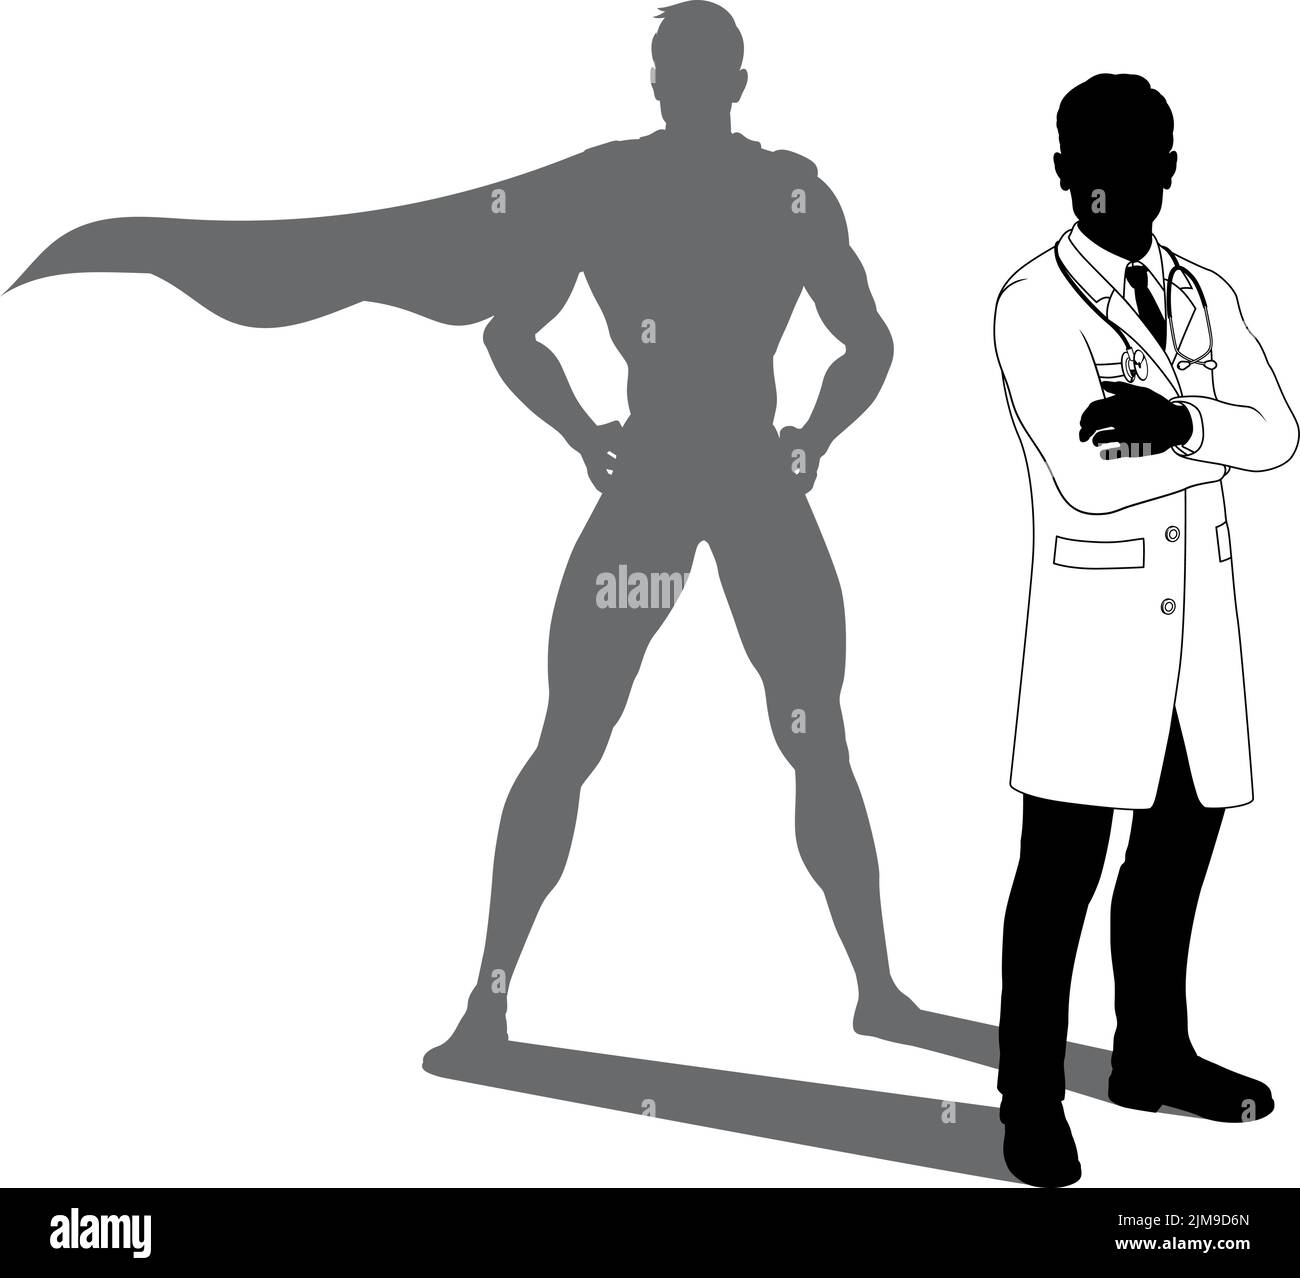 A superhero medical doctor man health care worker revealed by his shadow silhouette as a super hero in a cape. Stock Vector